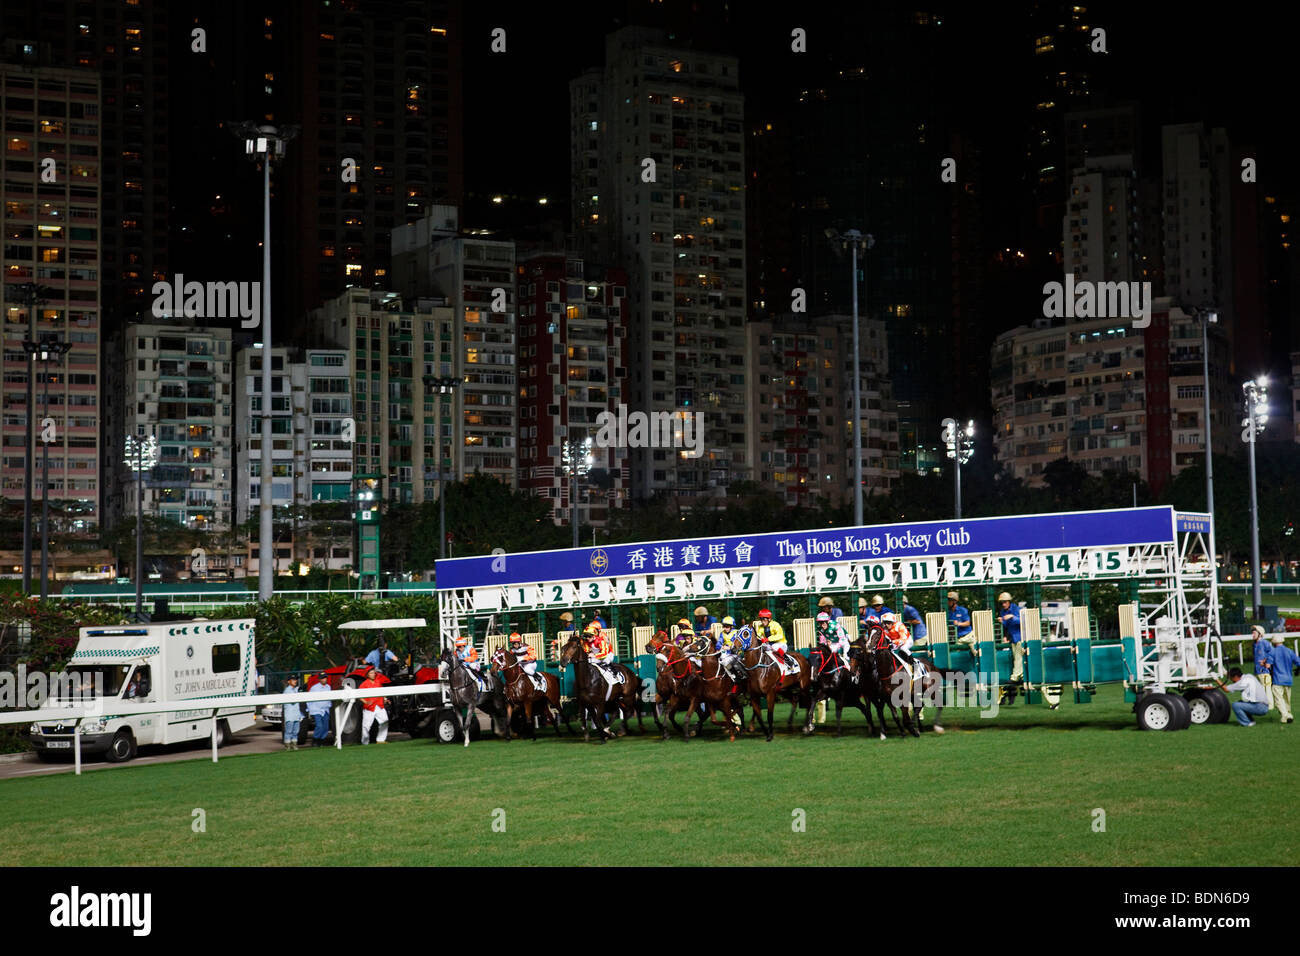 Race horses jump out of the starting gates at a night horse racing event at the Happy Valley race course in Hong Kong. Stock Photo